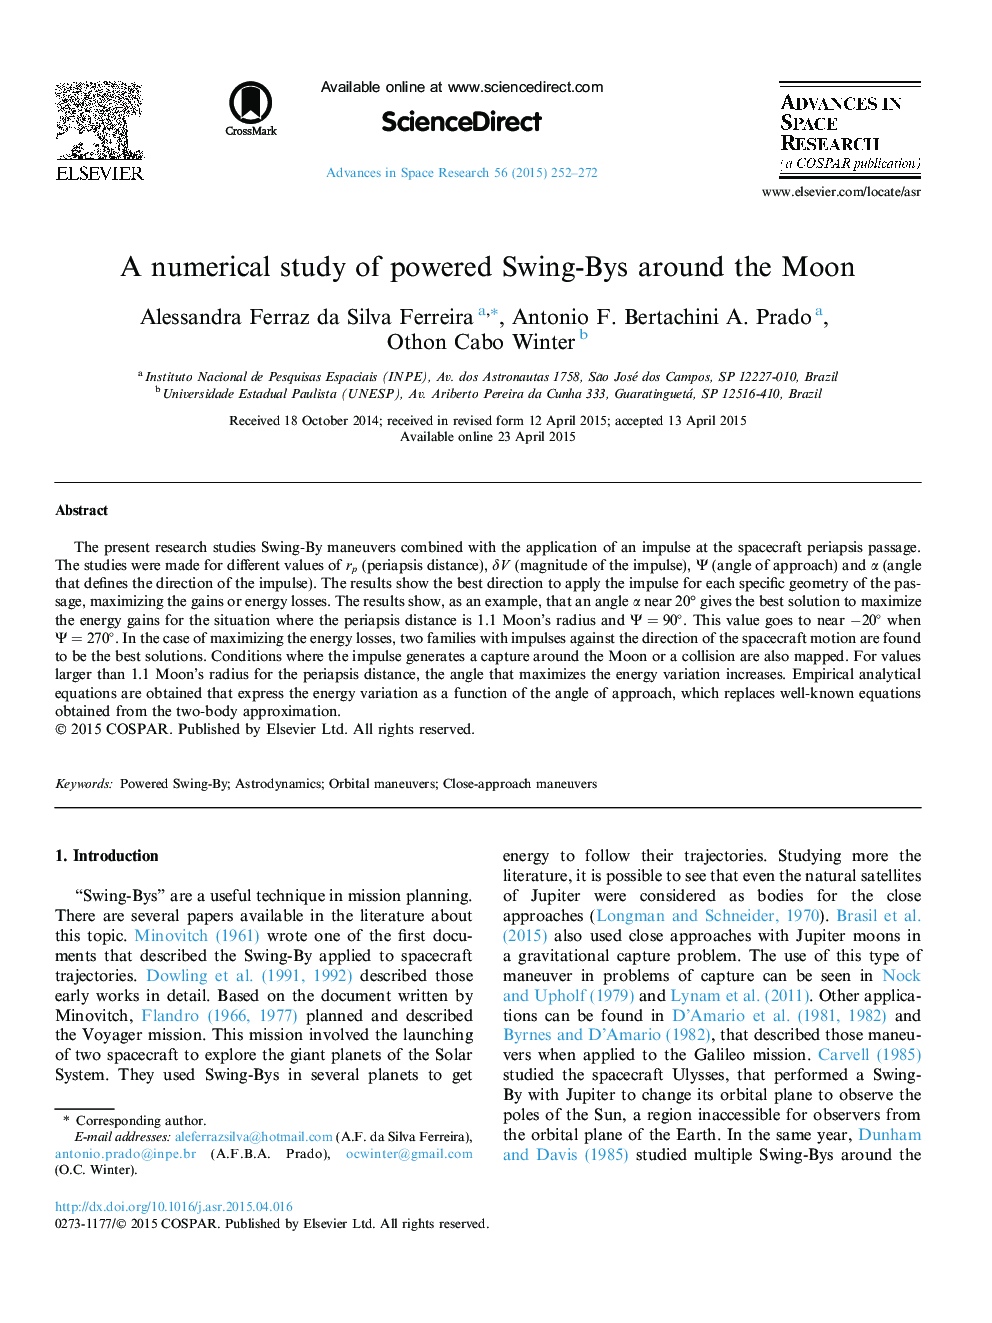 A numerical study of powered Swing-Bys around the Moon